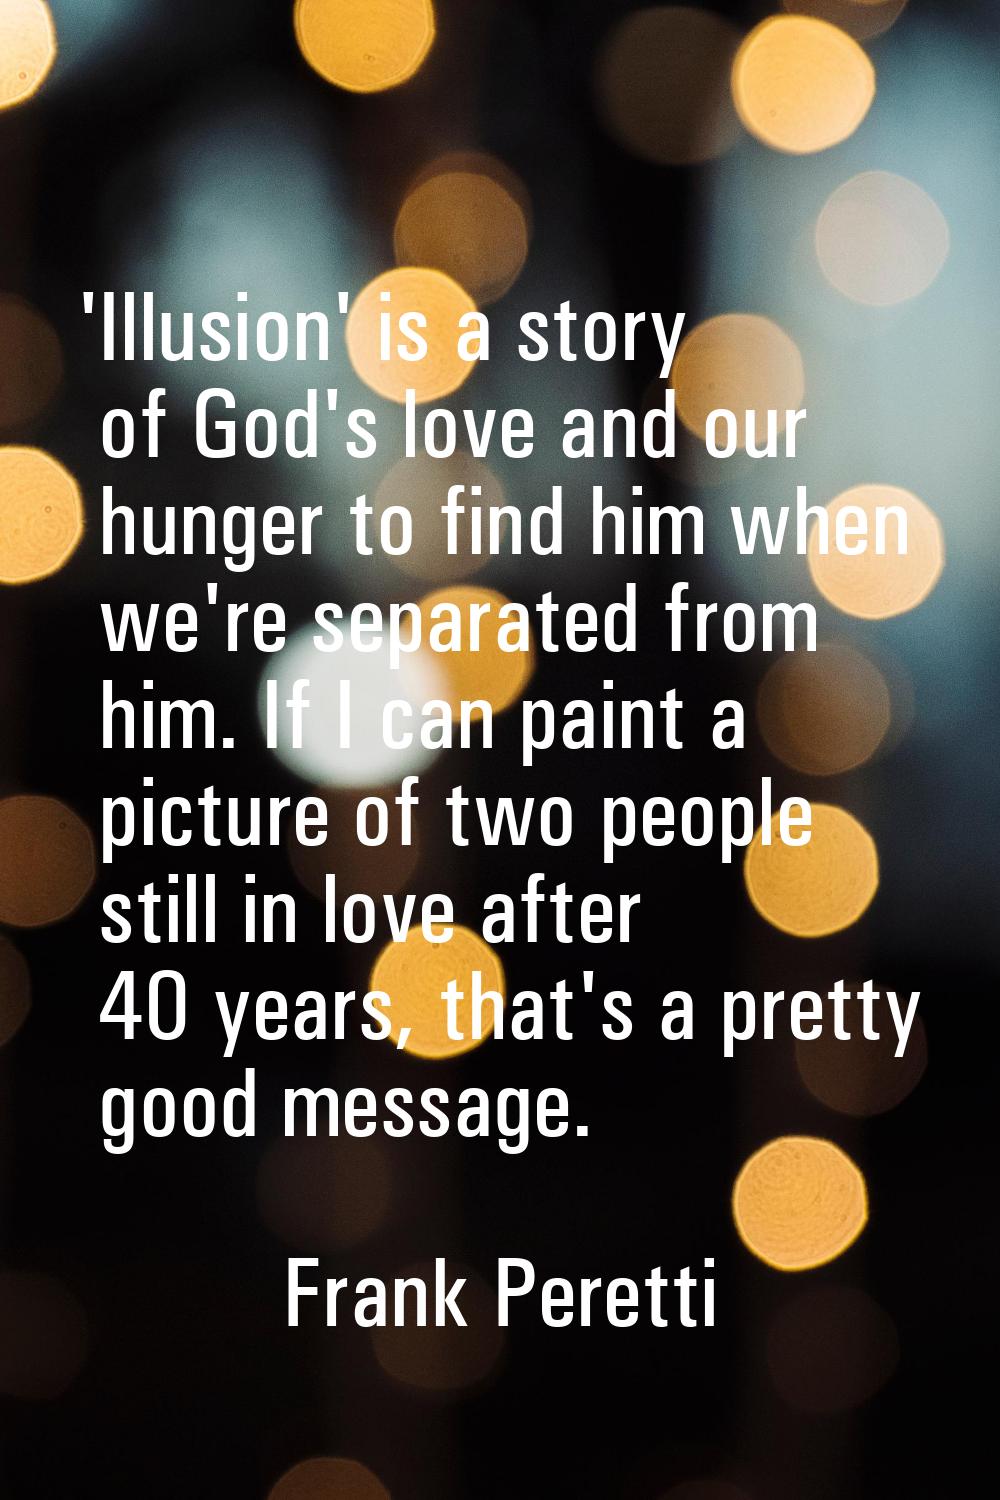 'Illusion' is a story of God's love and our hunger to find him when we're separated from him. If I 